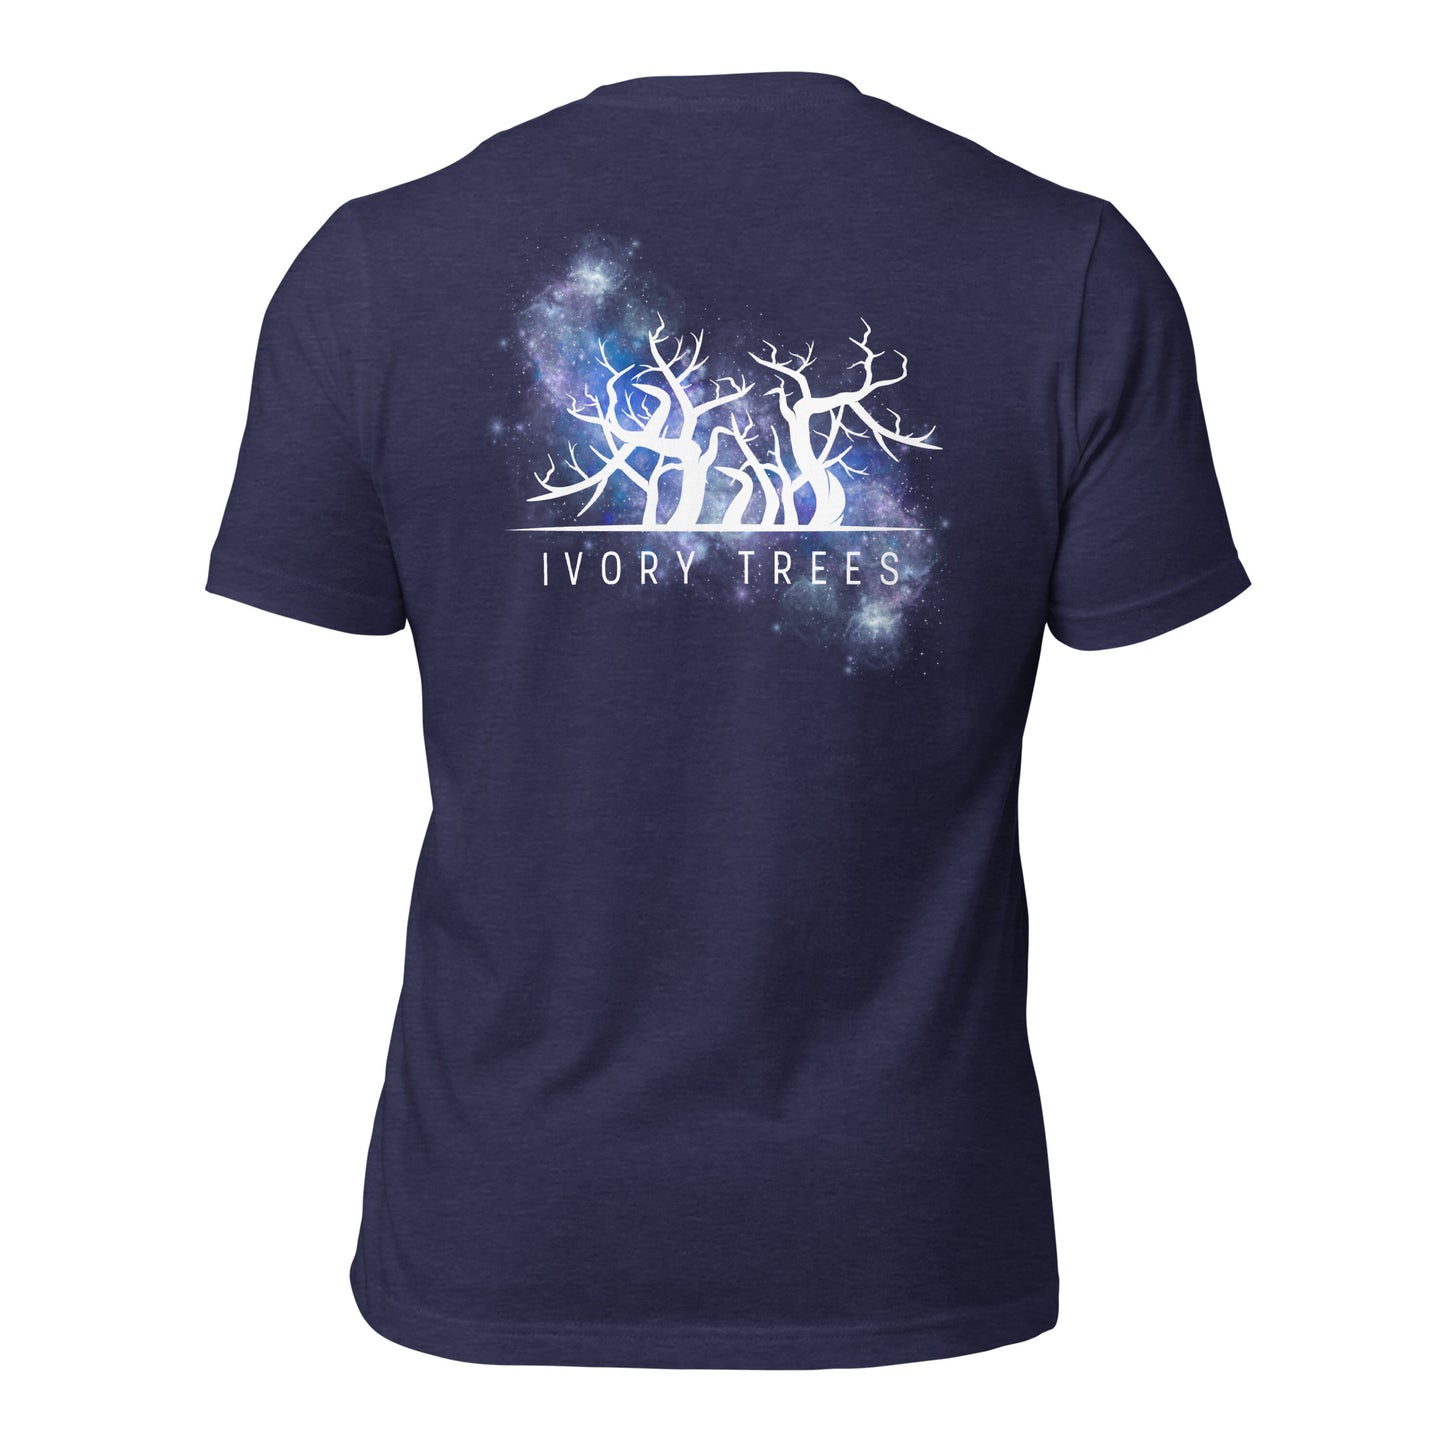 IVORY TREES NEBULA & Logo T-Shirt - The Diving Universe by Kristine Kathryn Rusch